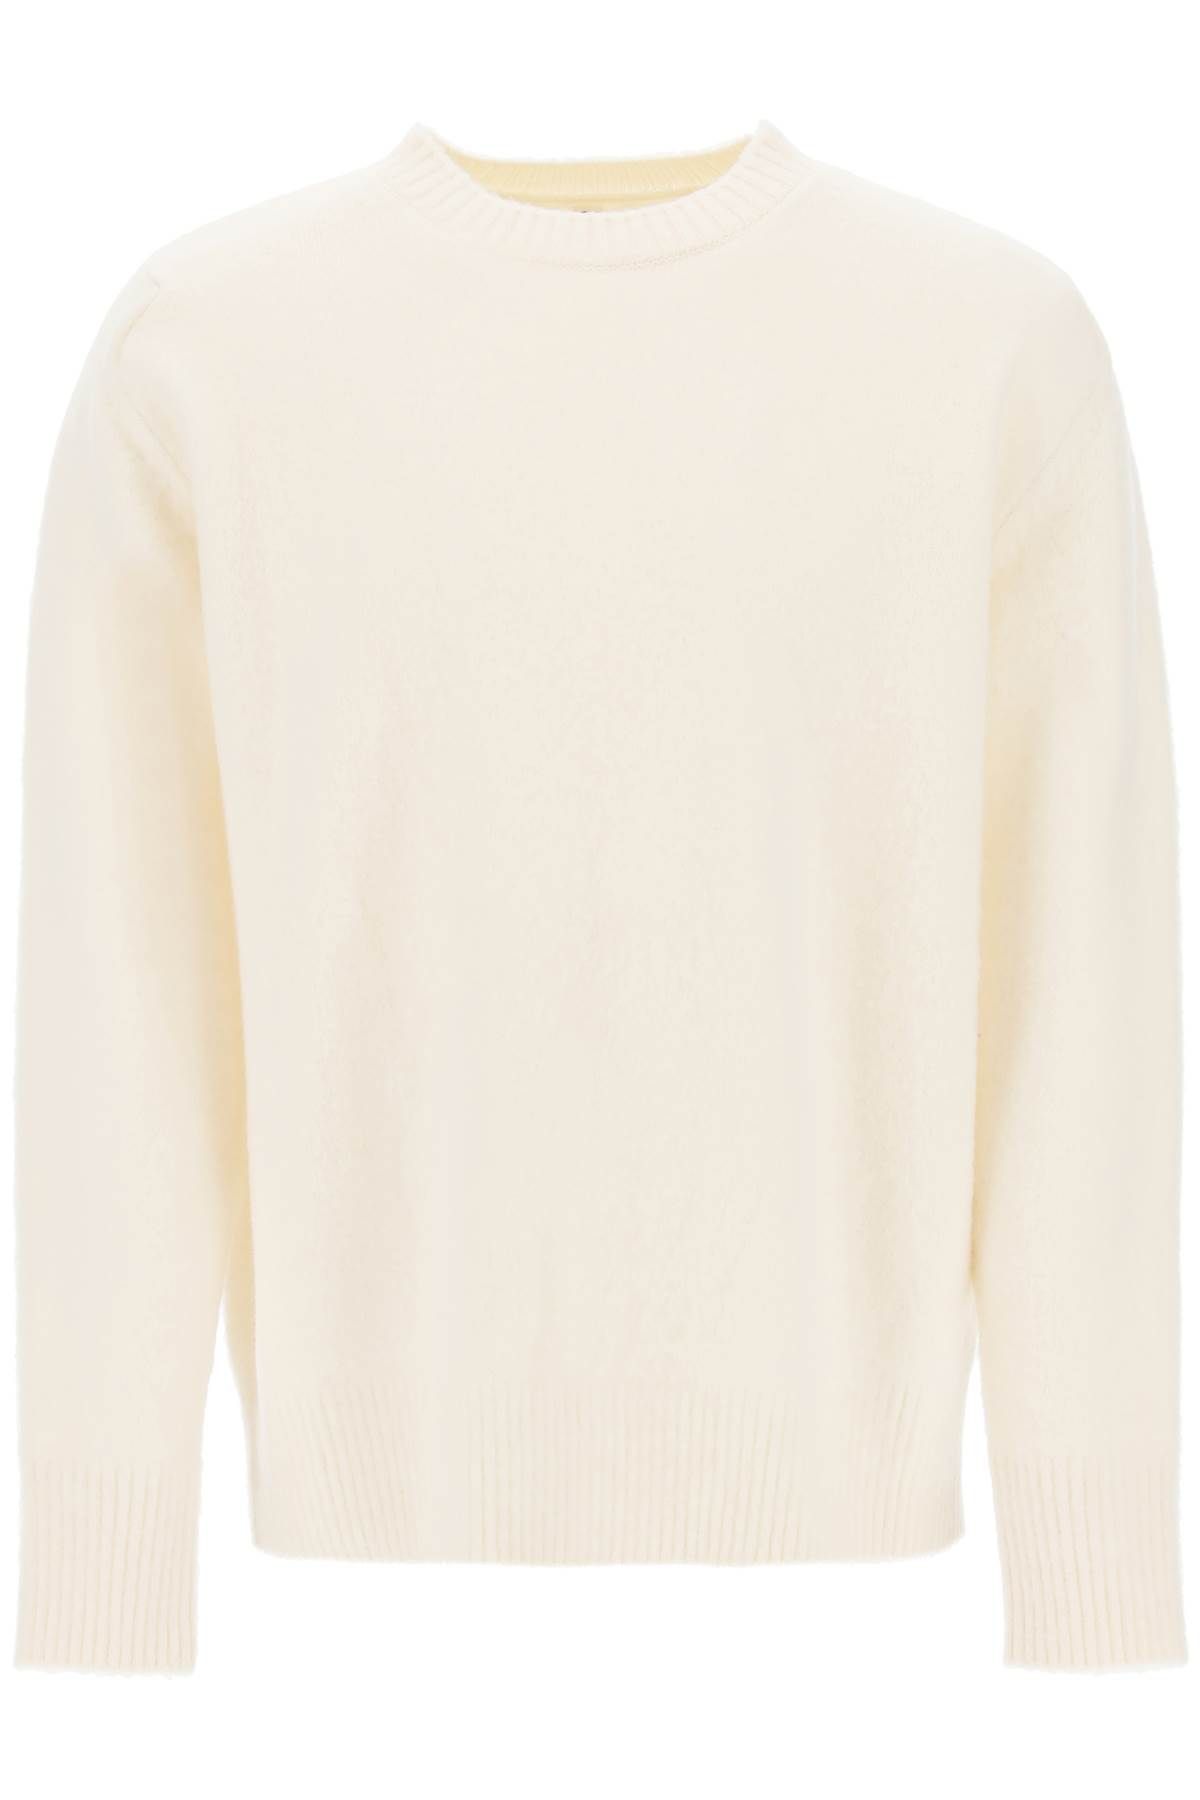 Shop Oamc Wool Sweater With Jacquard Logo In White